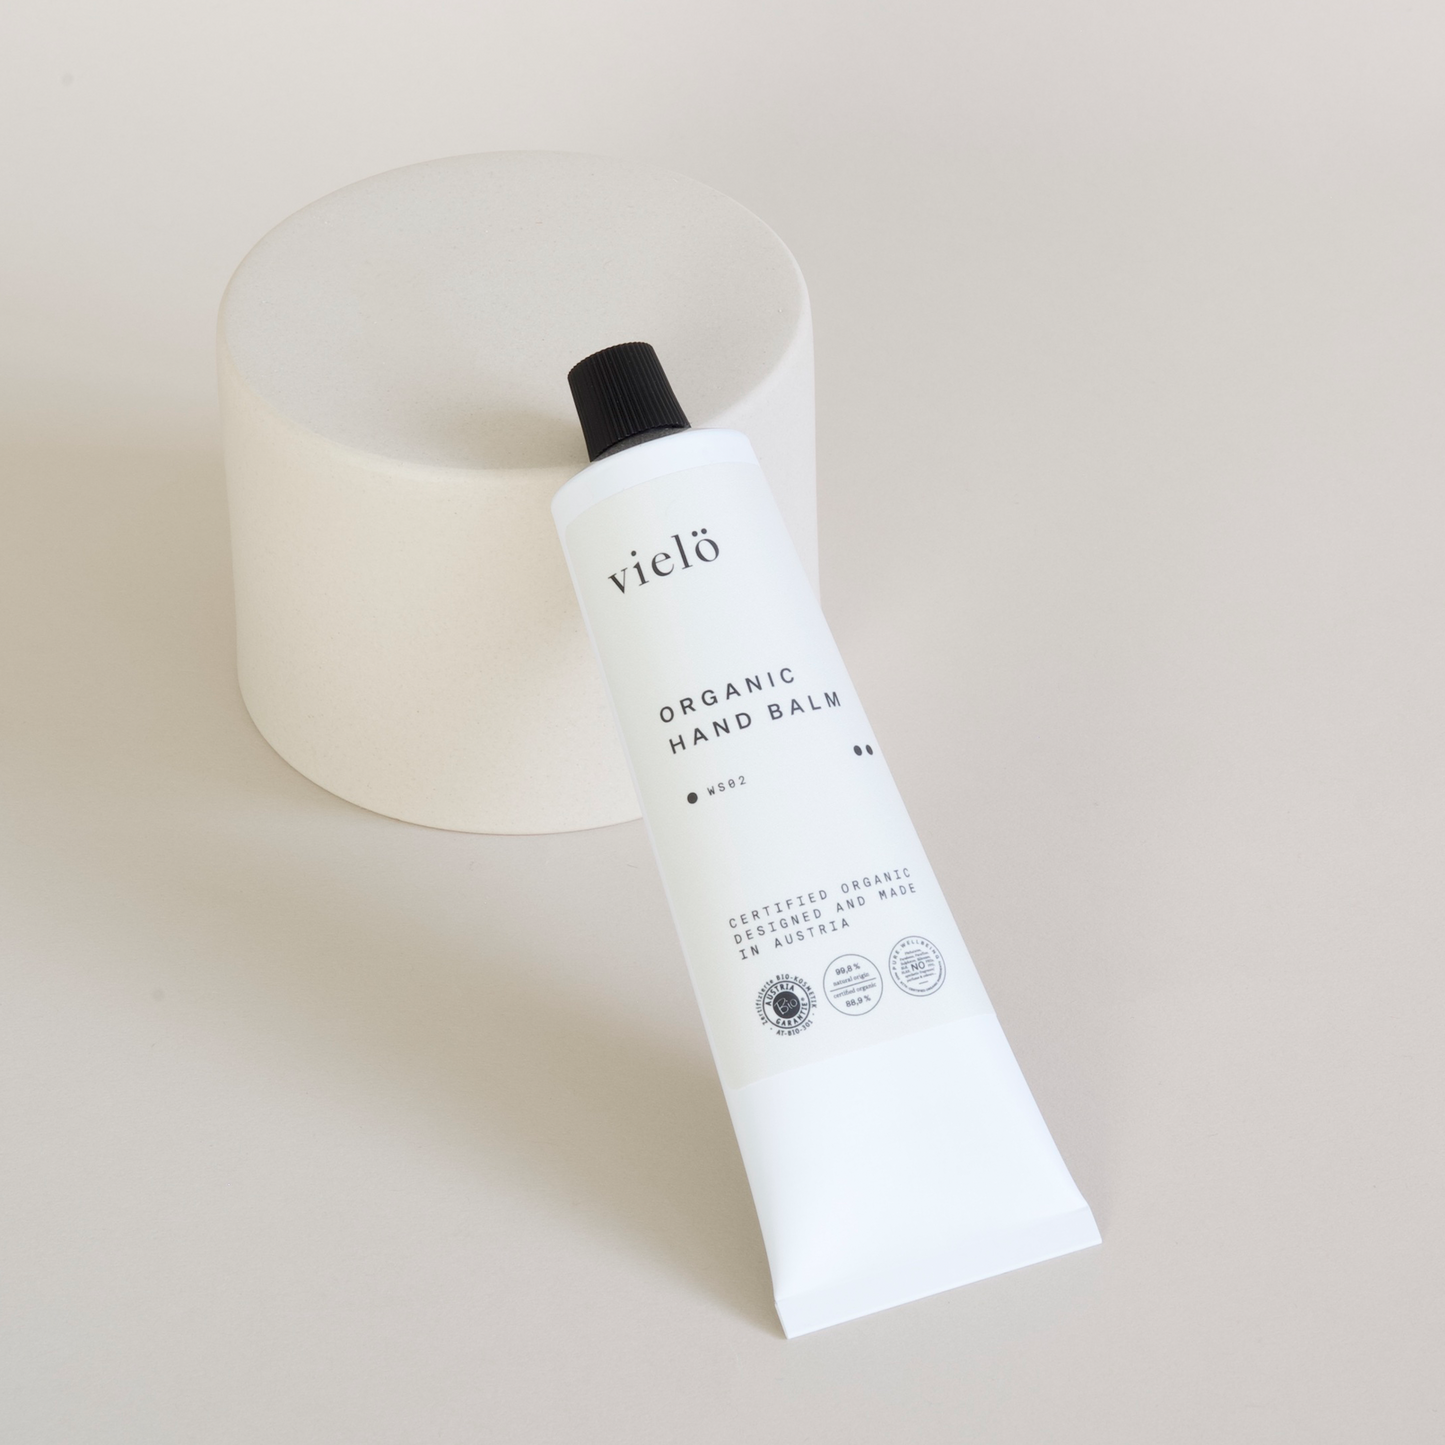 Vielo Organic Hand Balm: Nourishing organic hand balm, specially designed to moisturize and soften dry and sensitive hands. Suitable for all skin types.